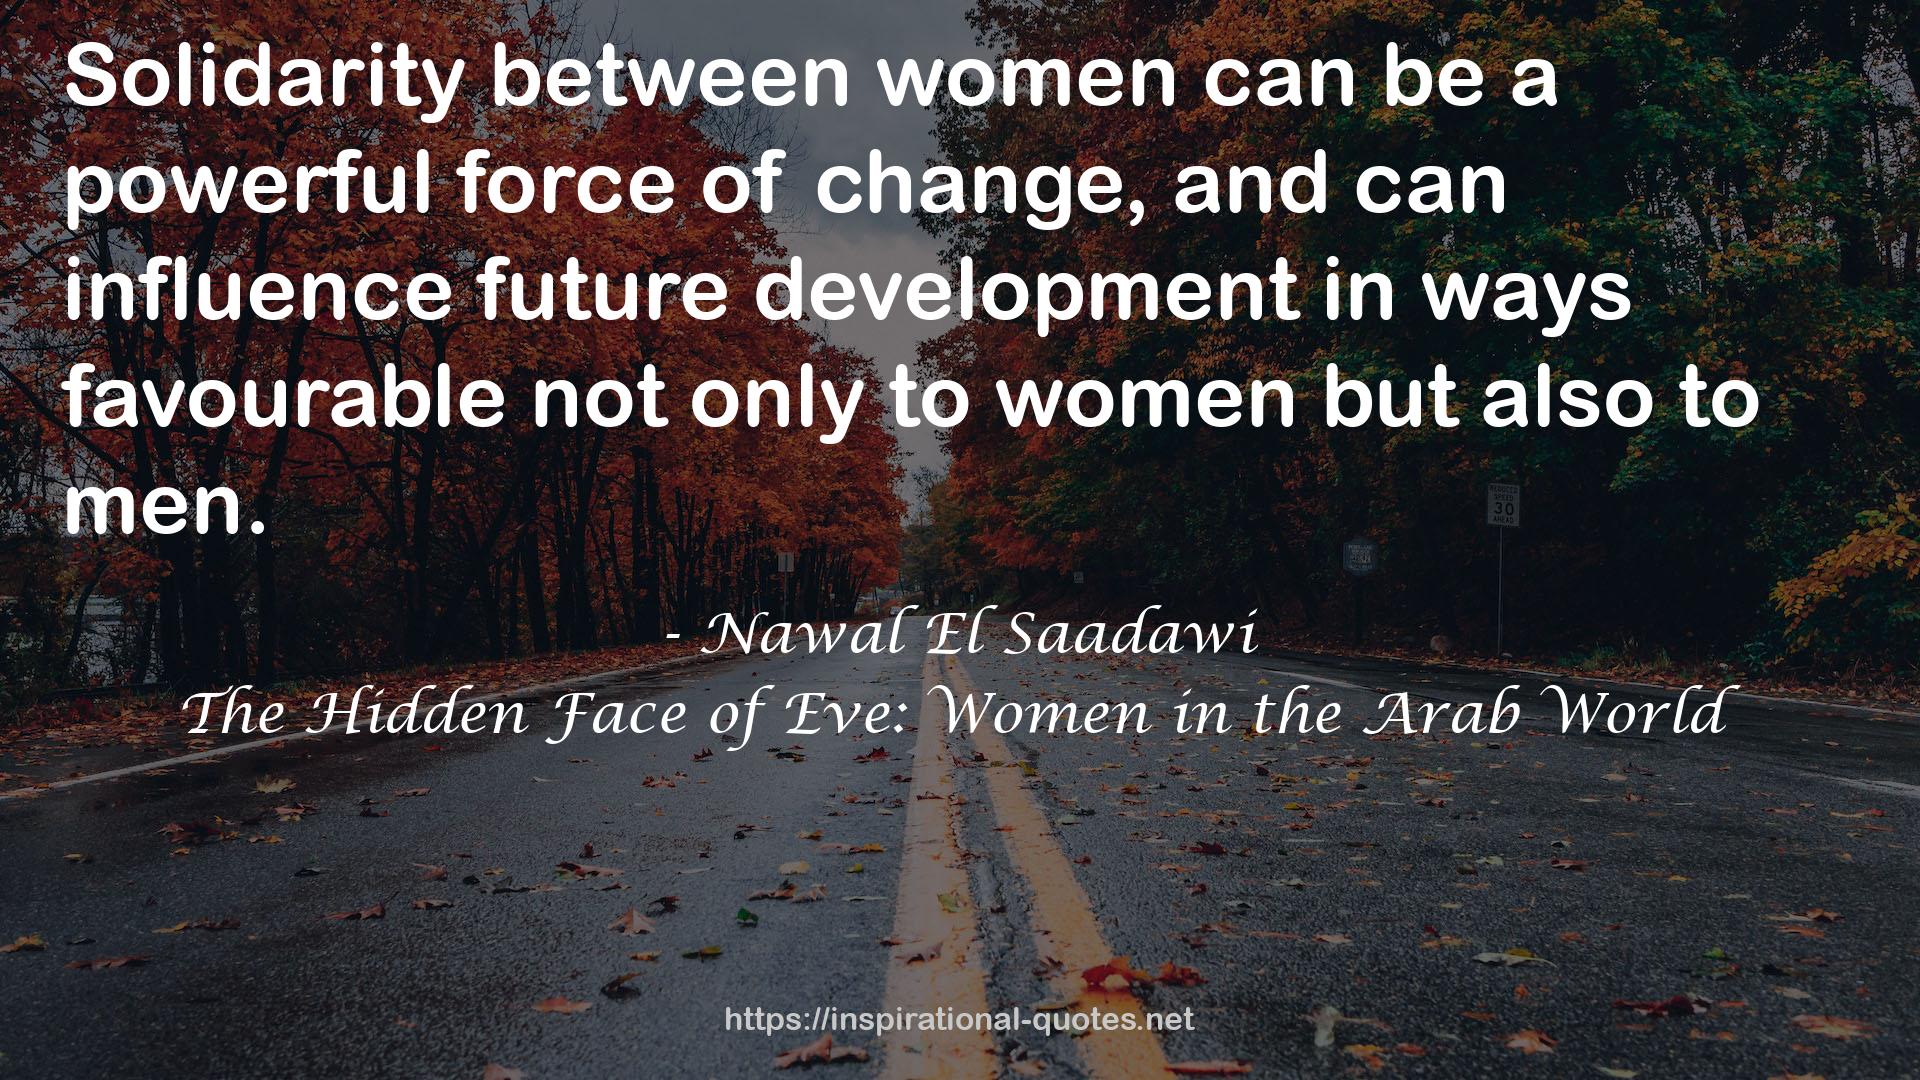 The Hidden Face of Eve: Women in the Arab World QUOTES